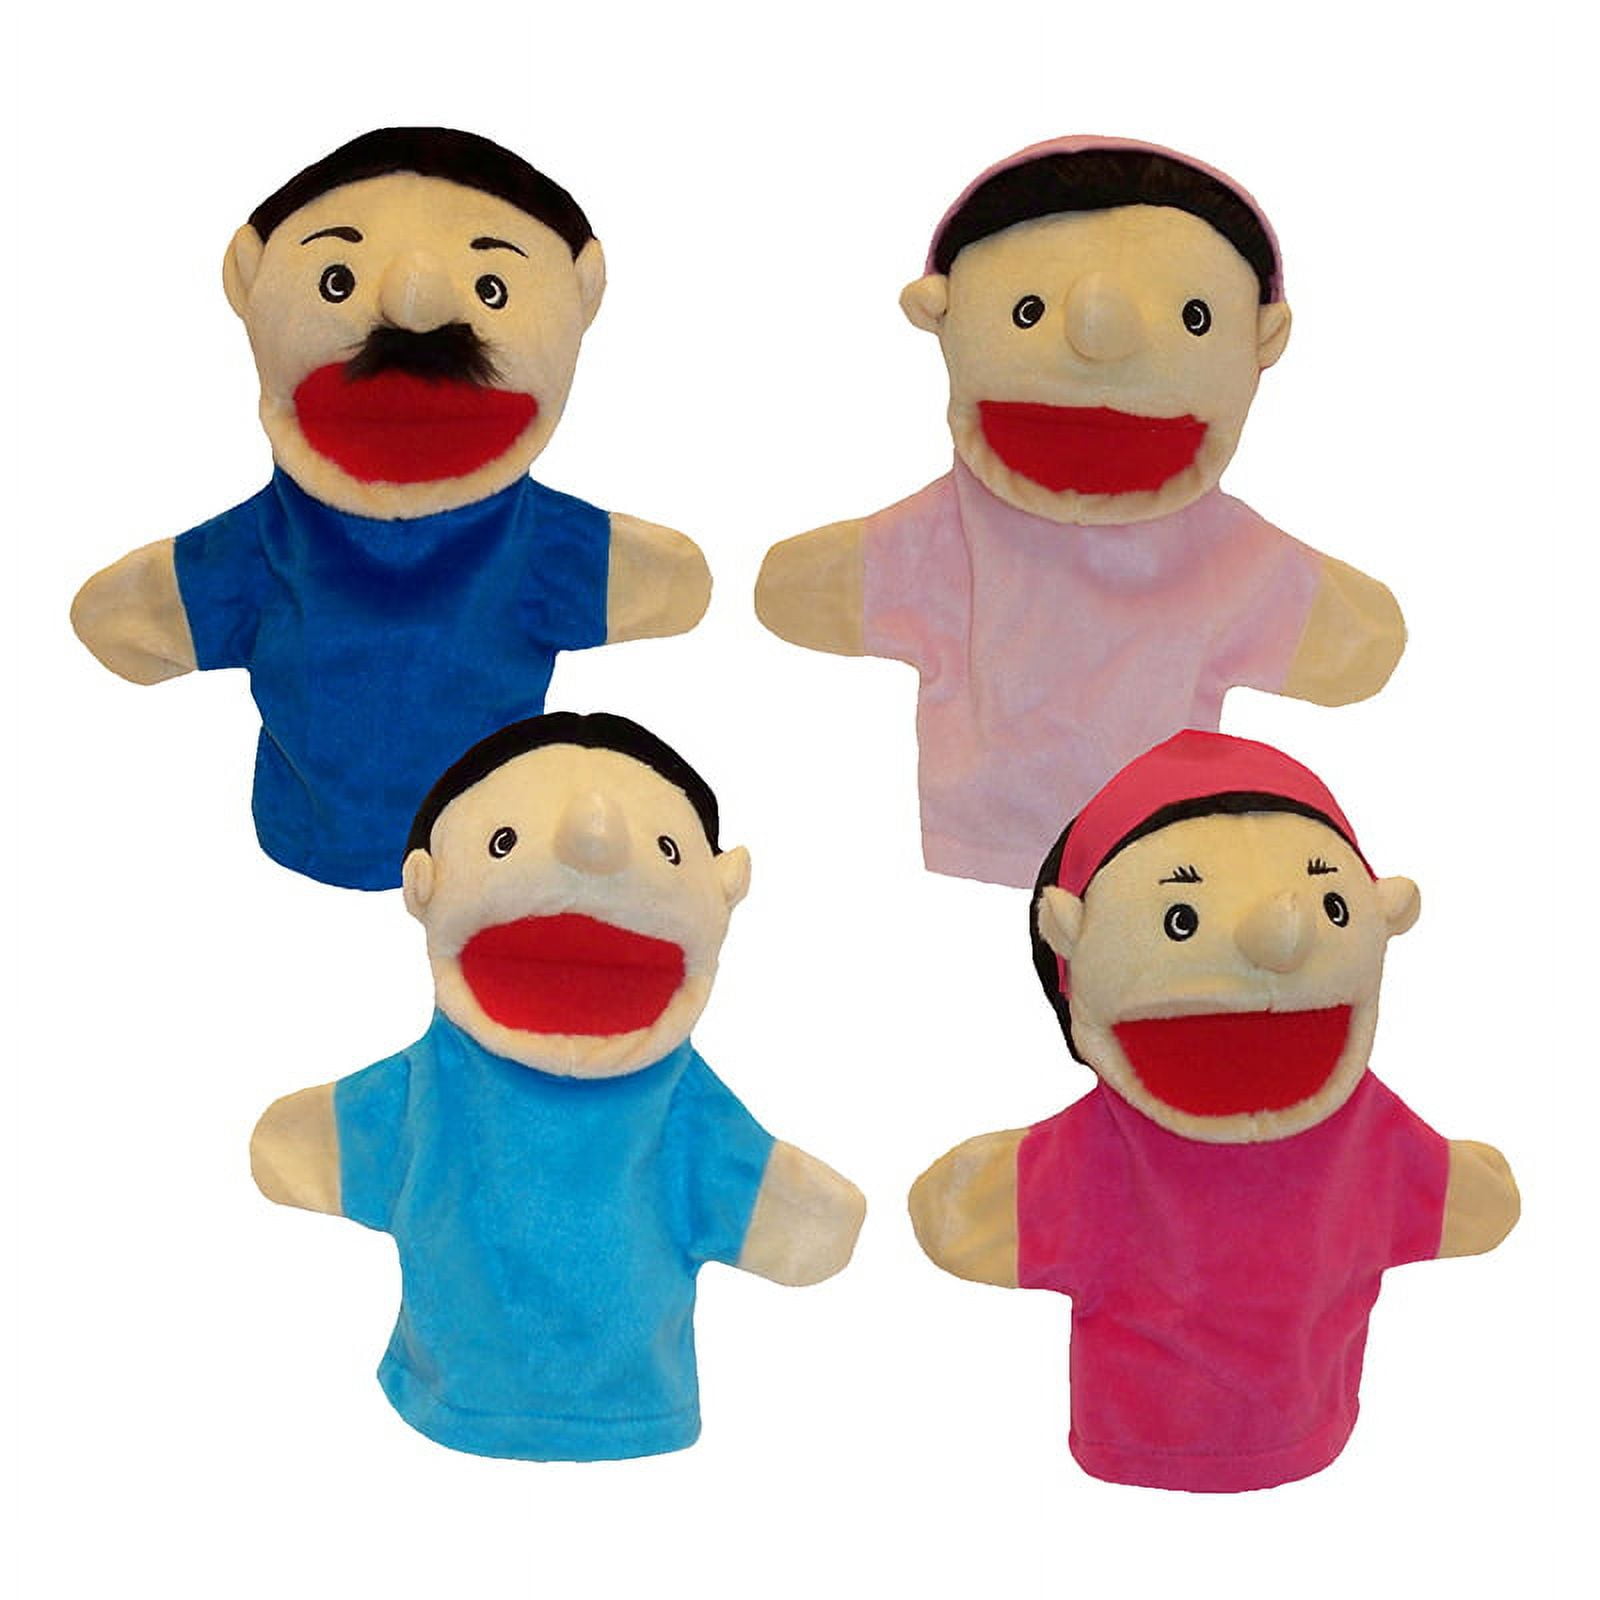 Bobby's Game Time Hand Doll Model Bobby Doll Sausage Monster Hand Doll  Model Ornaments Kids Toys Boys Girls Toys Hand Doll Models Hand Doll  Ornaments, Shop Now For Limited-time Deals